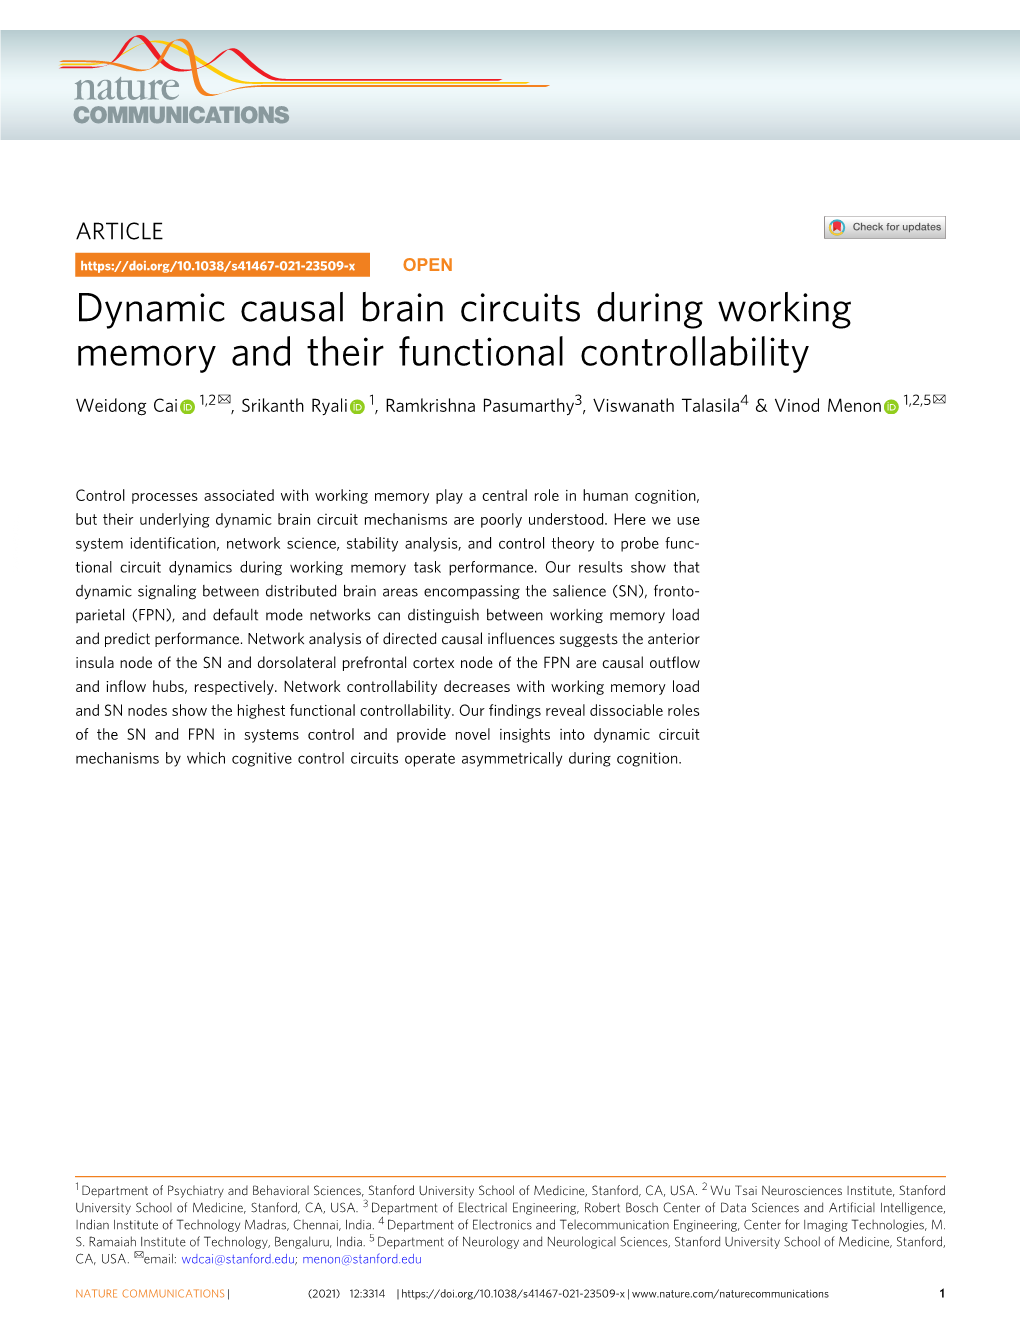 Dynamic Causal Brain Circuits During Working Memory and Their